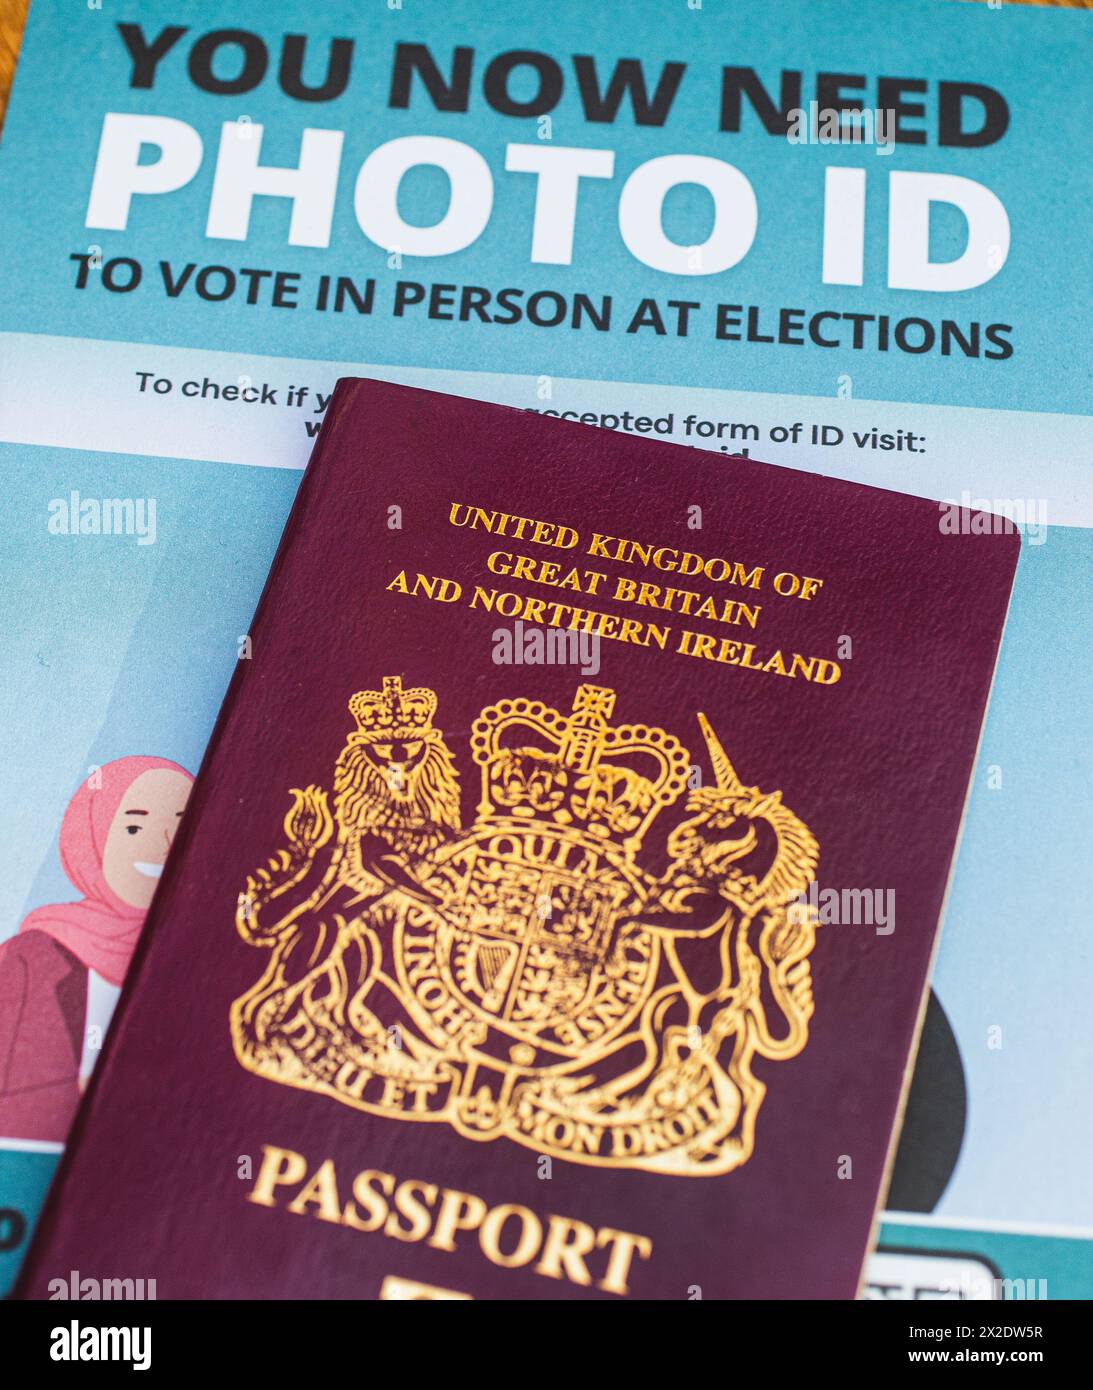 British passport with a leaflet showing that voters in England will need to show a photo ID to vote at polling stations in some elections. UK Stock Photo